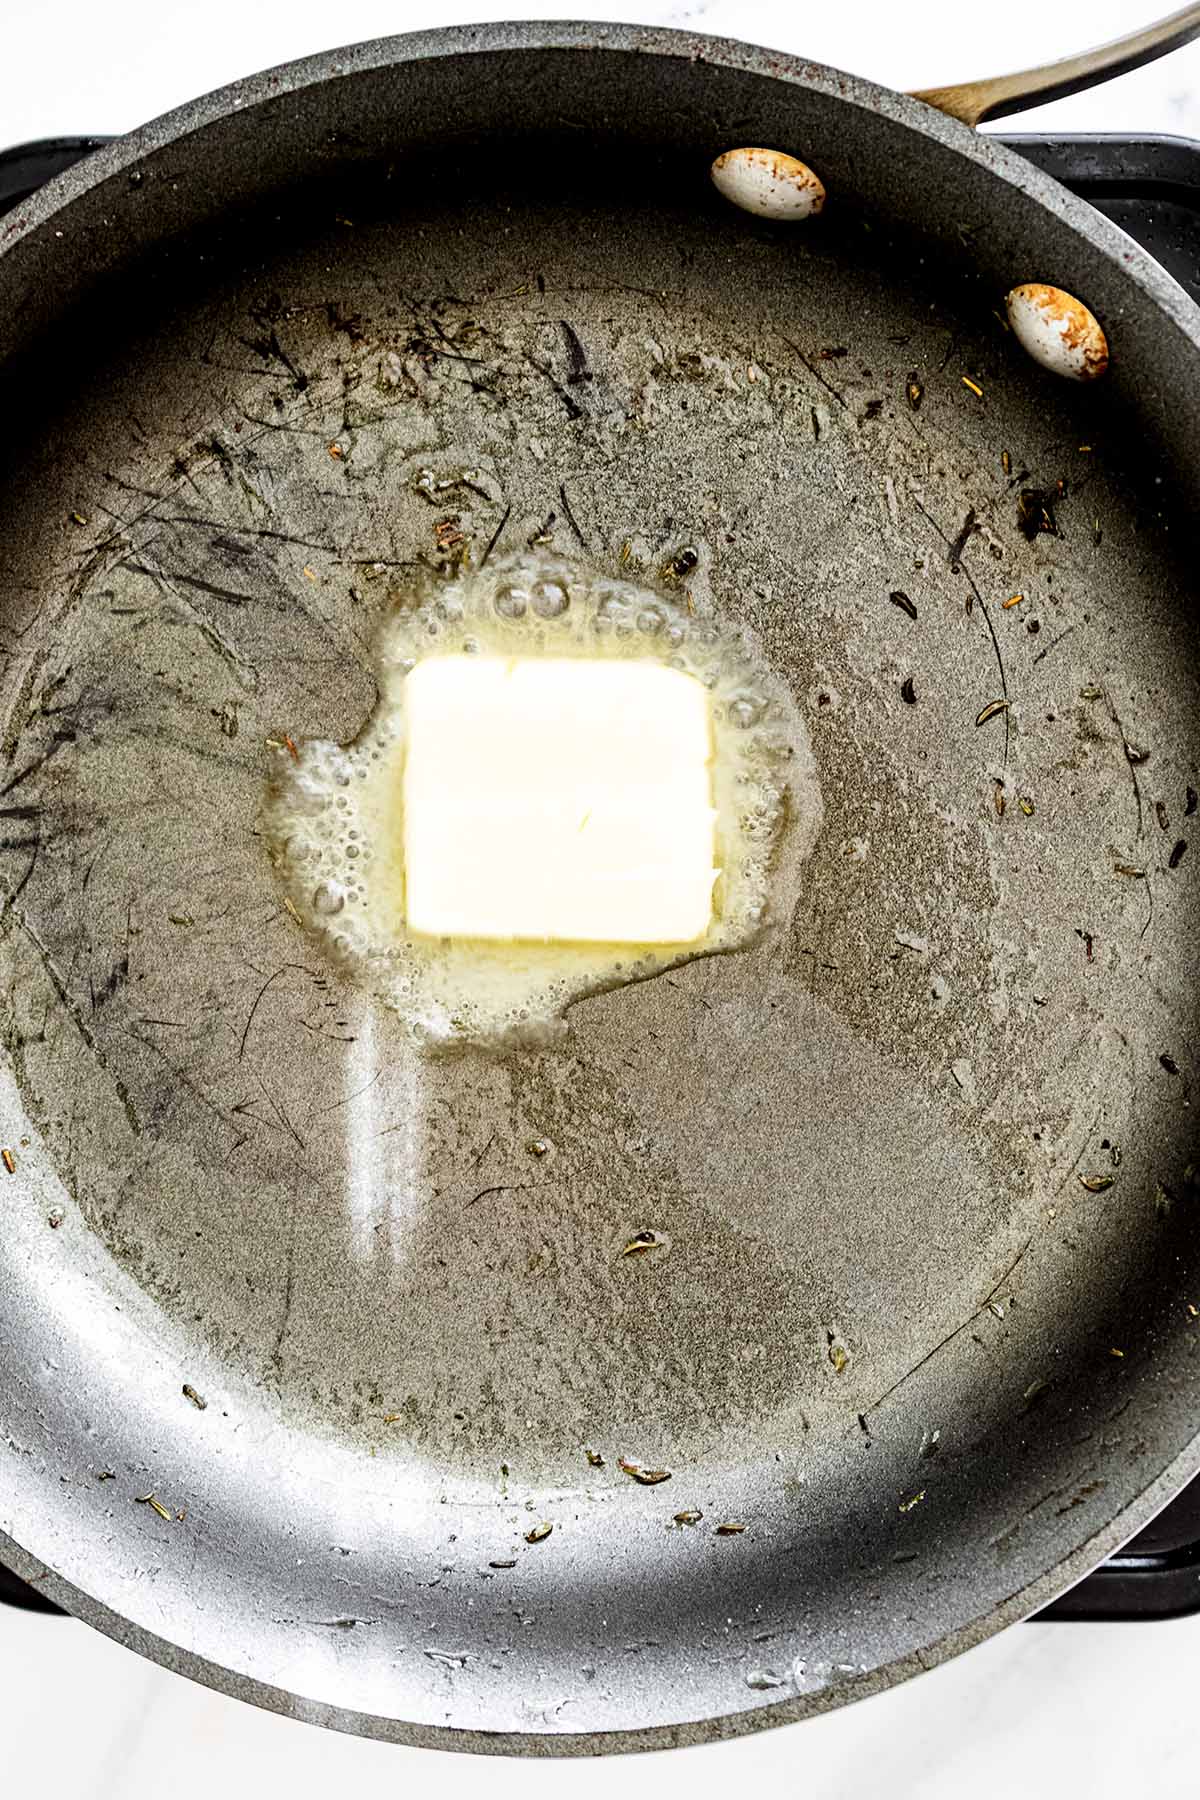 Pat of butter melting in a skillet